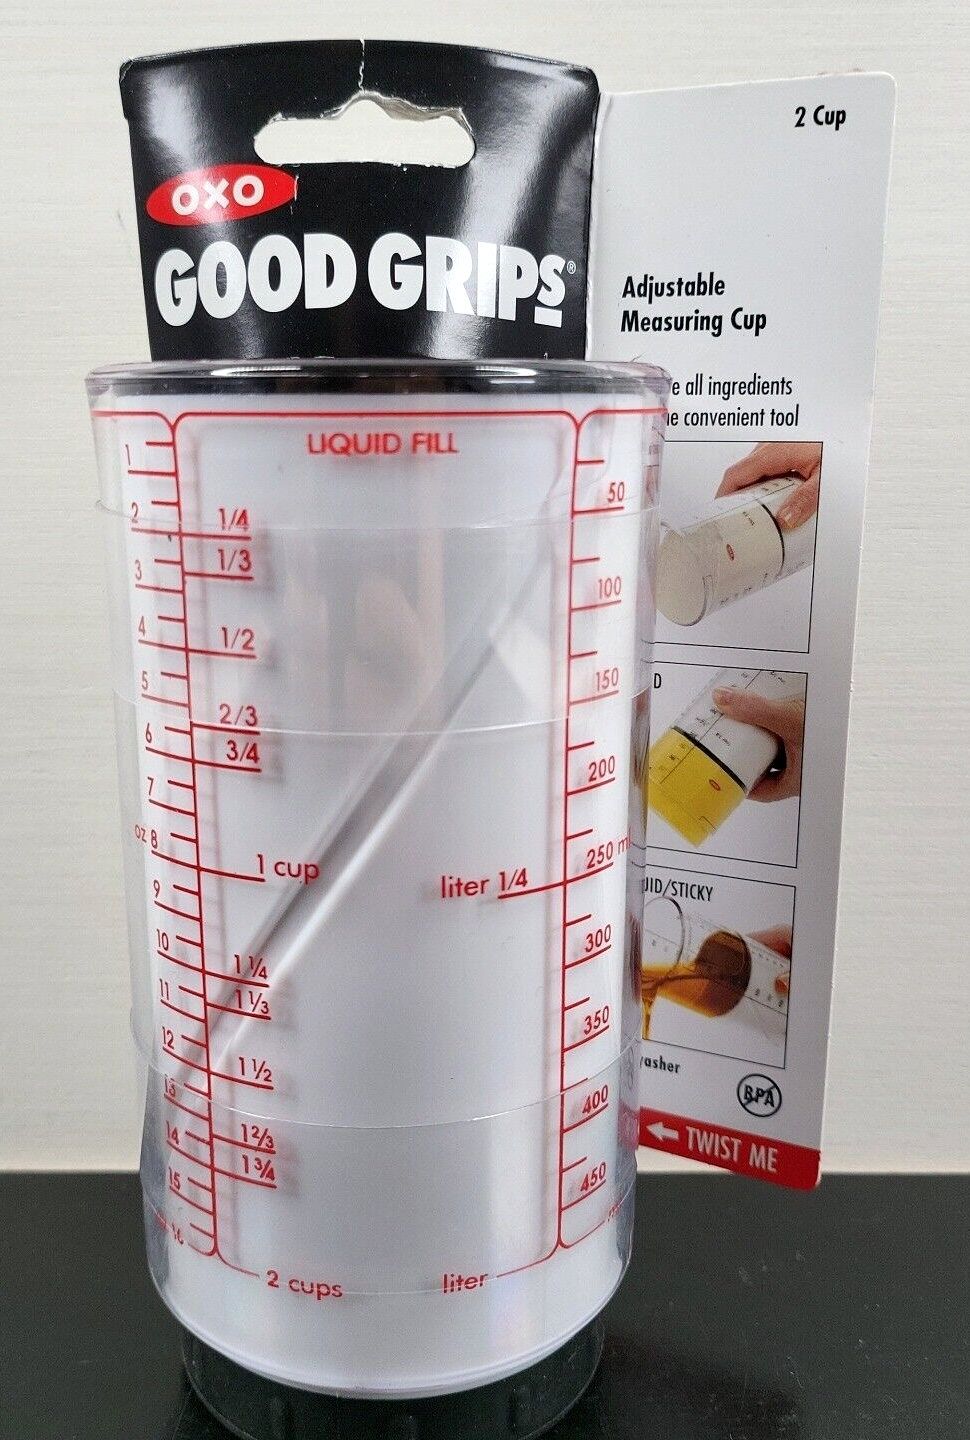 OXO Good Grips Adjustable Measuring 2 Cup Easy Pour Liquid Dry Ingredients NEW - $35.63